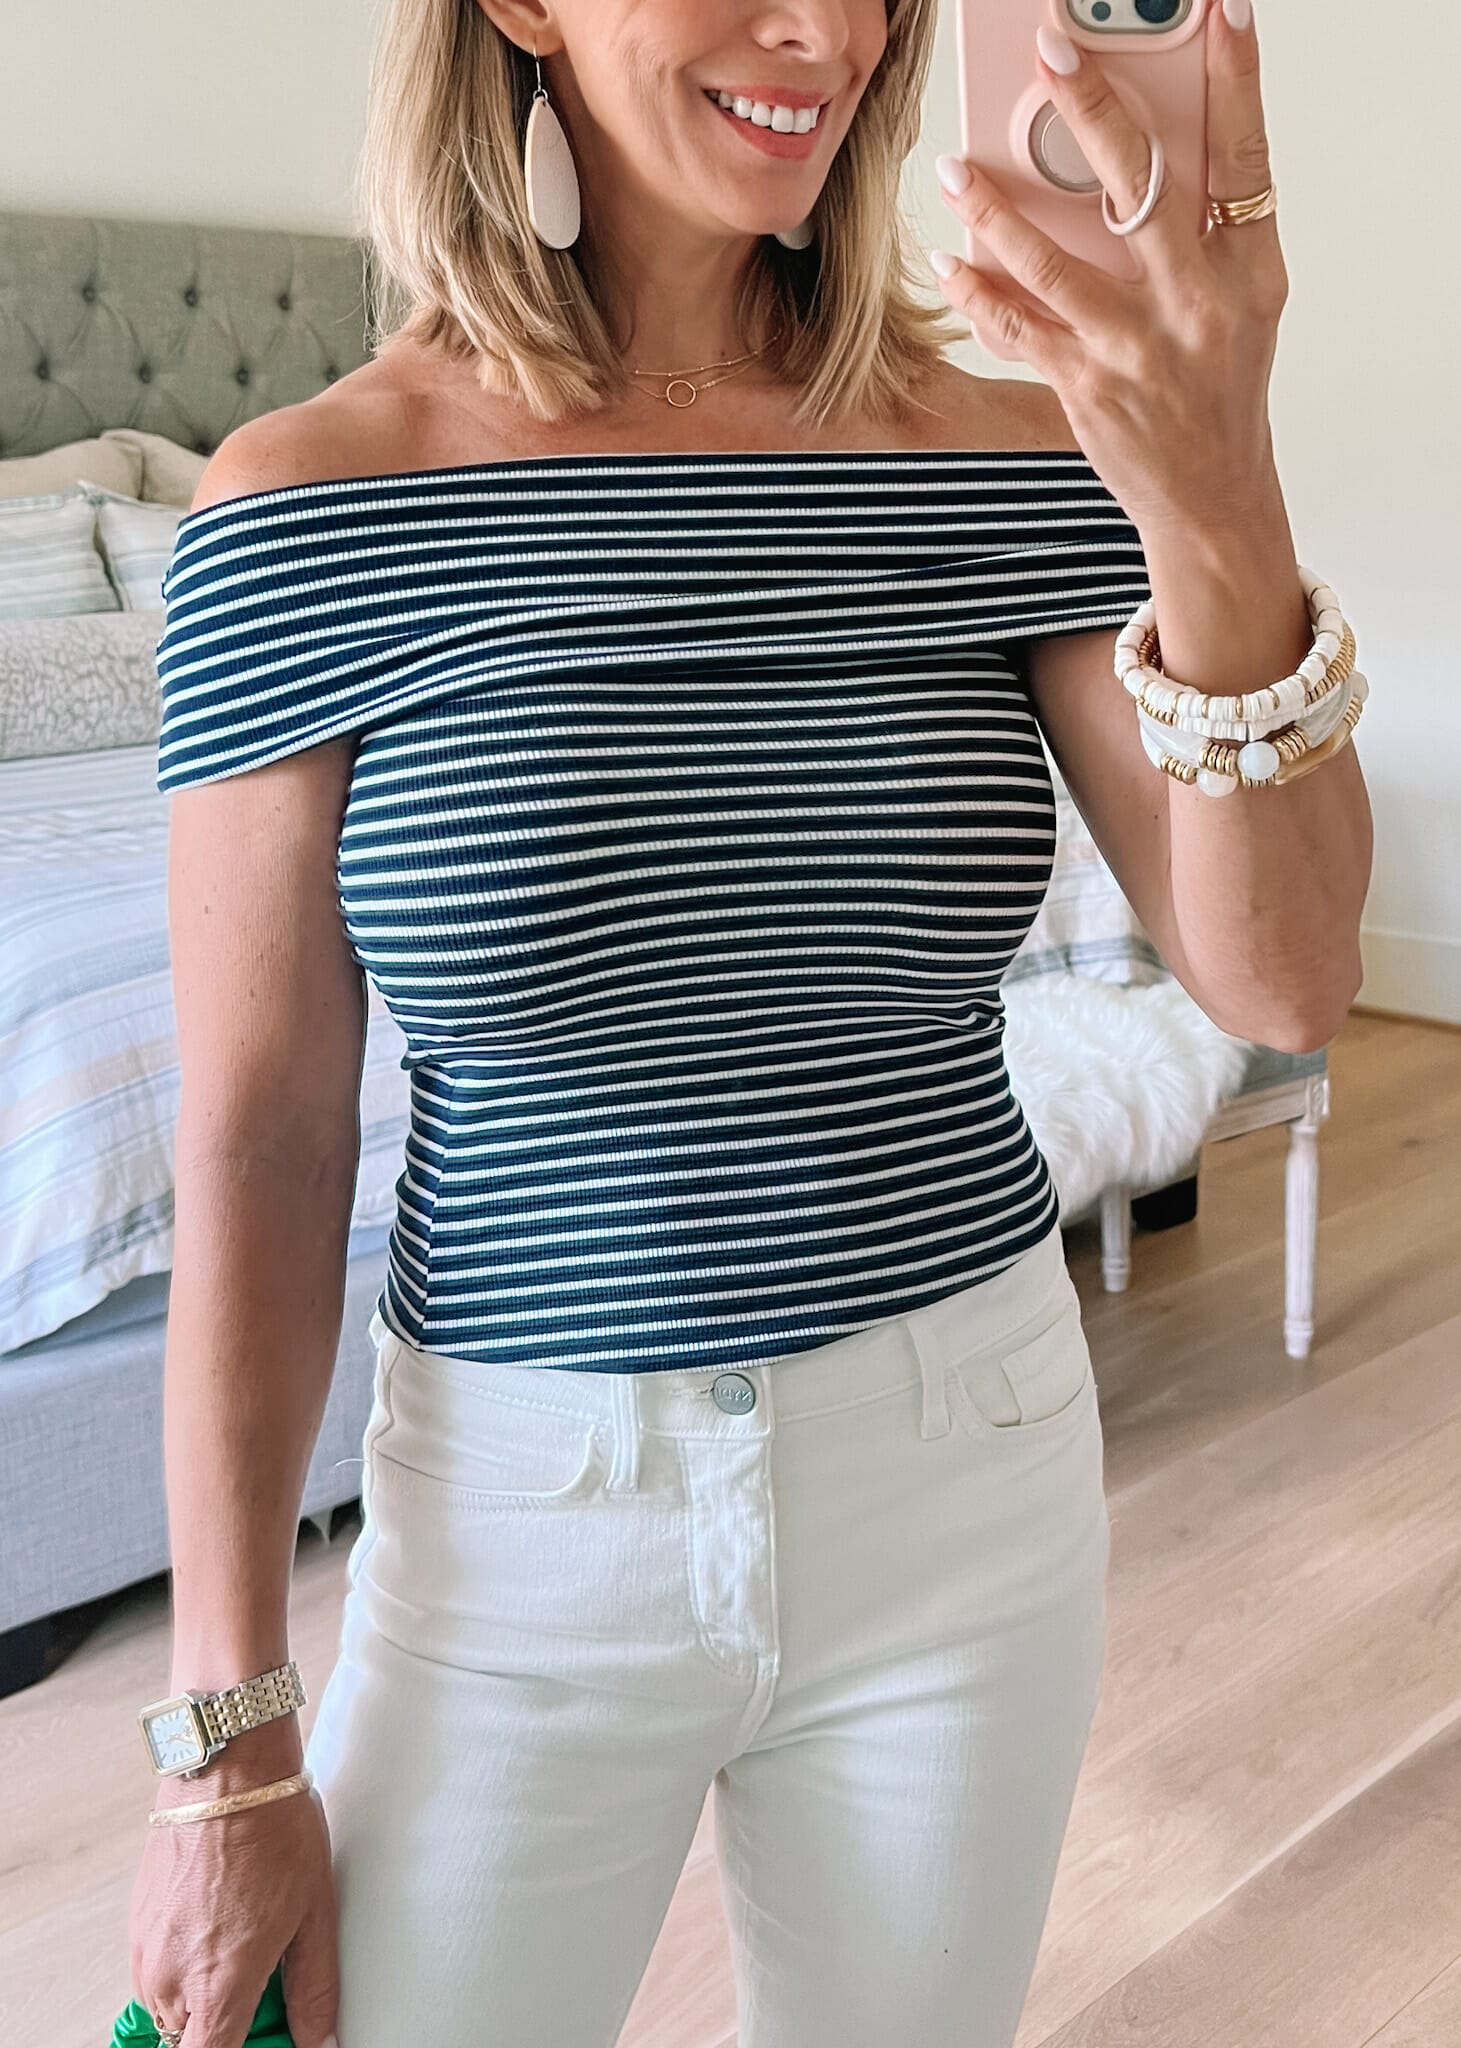 Striped Top, Jeans, Sandals, Green Purse